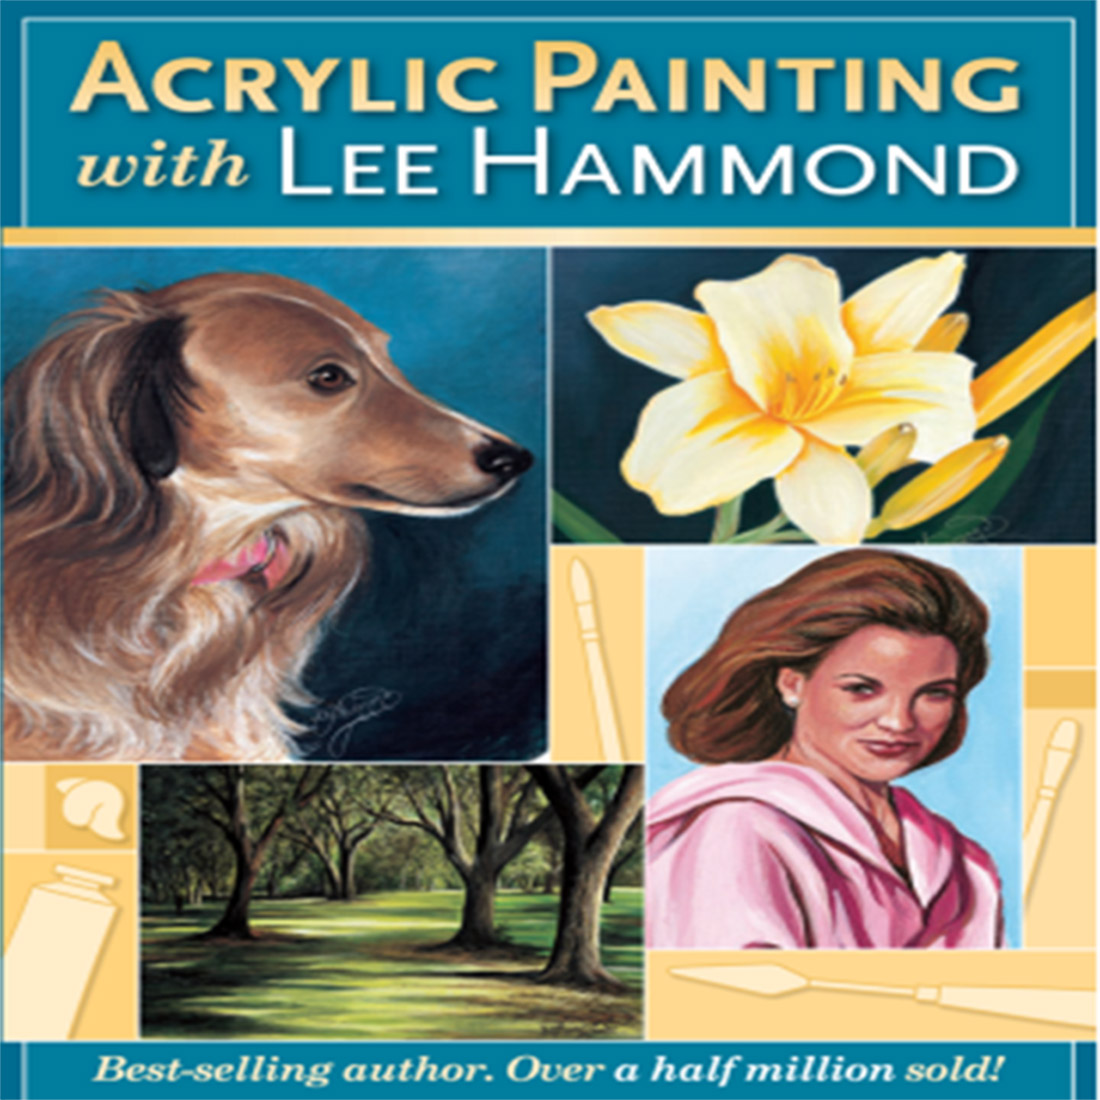 Acrylic painting with Lee Hammondpdf preview image.